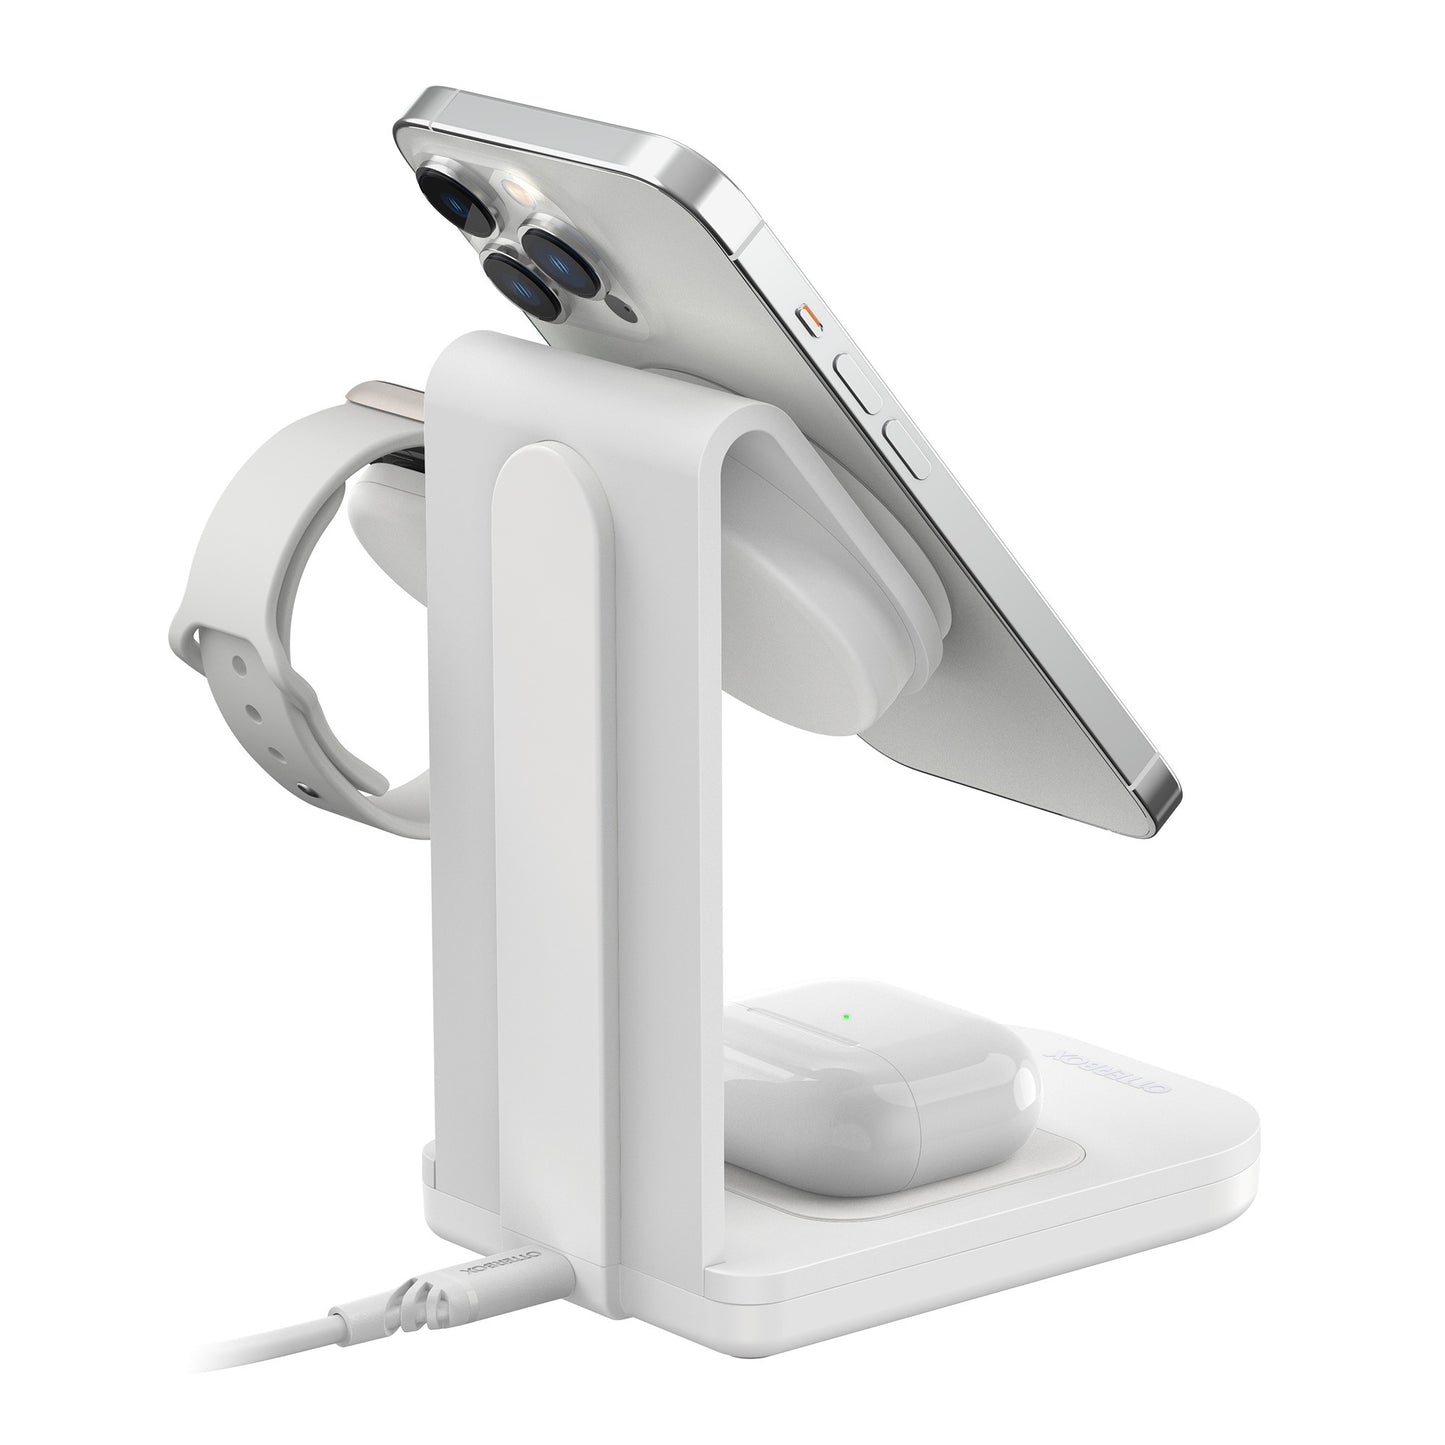 Otterbox 3-in-1 Charging Station Made for MagSafe w/ Apple Watch Charger + Airpods - White - 15-10678